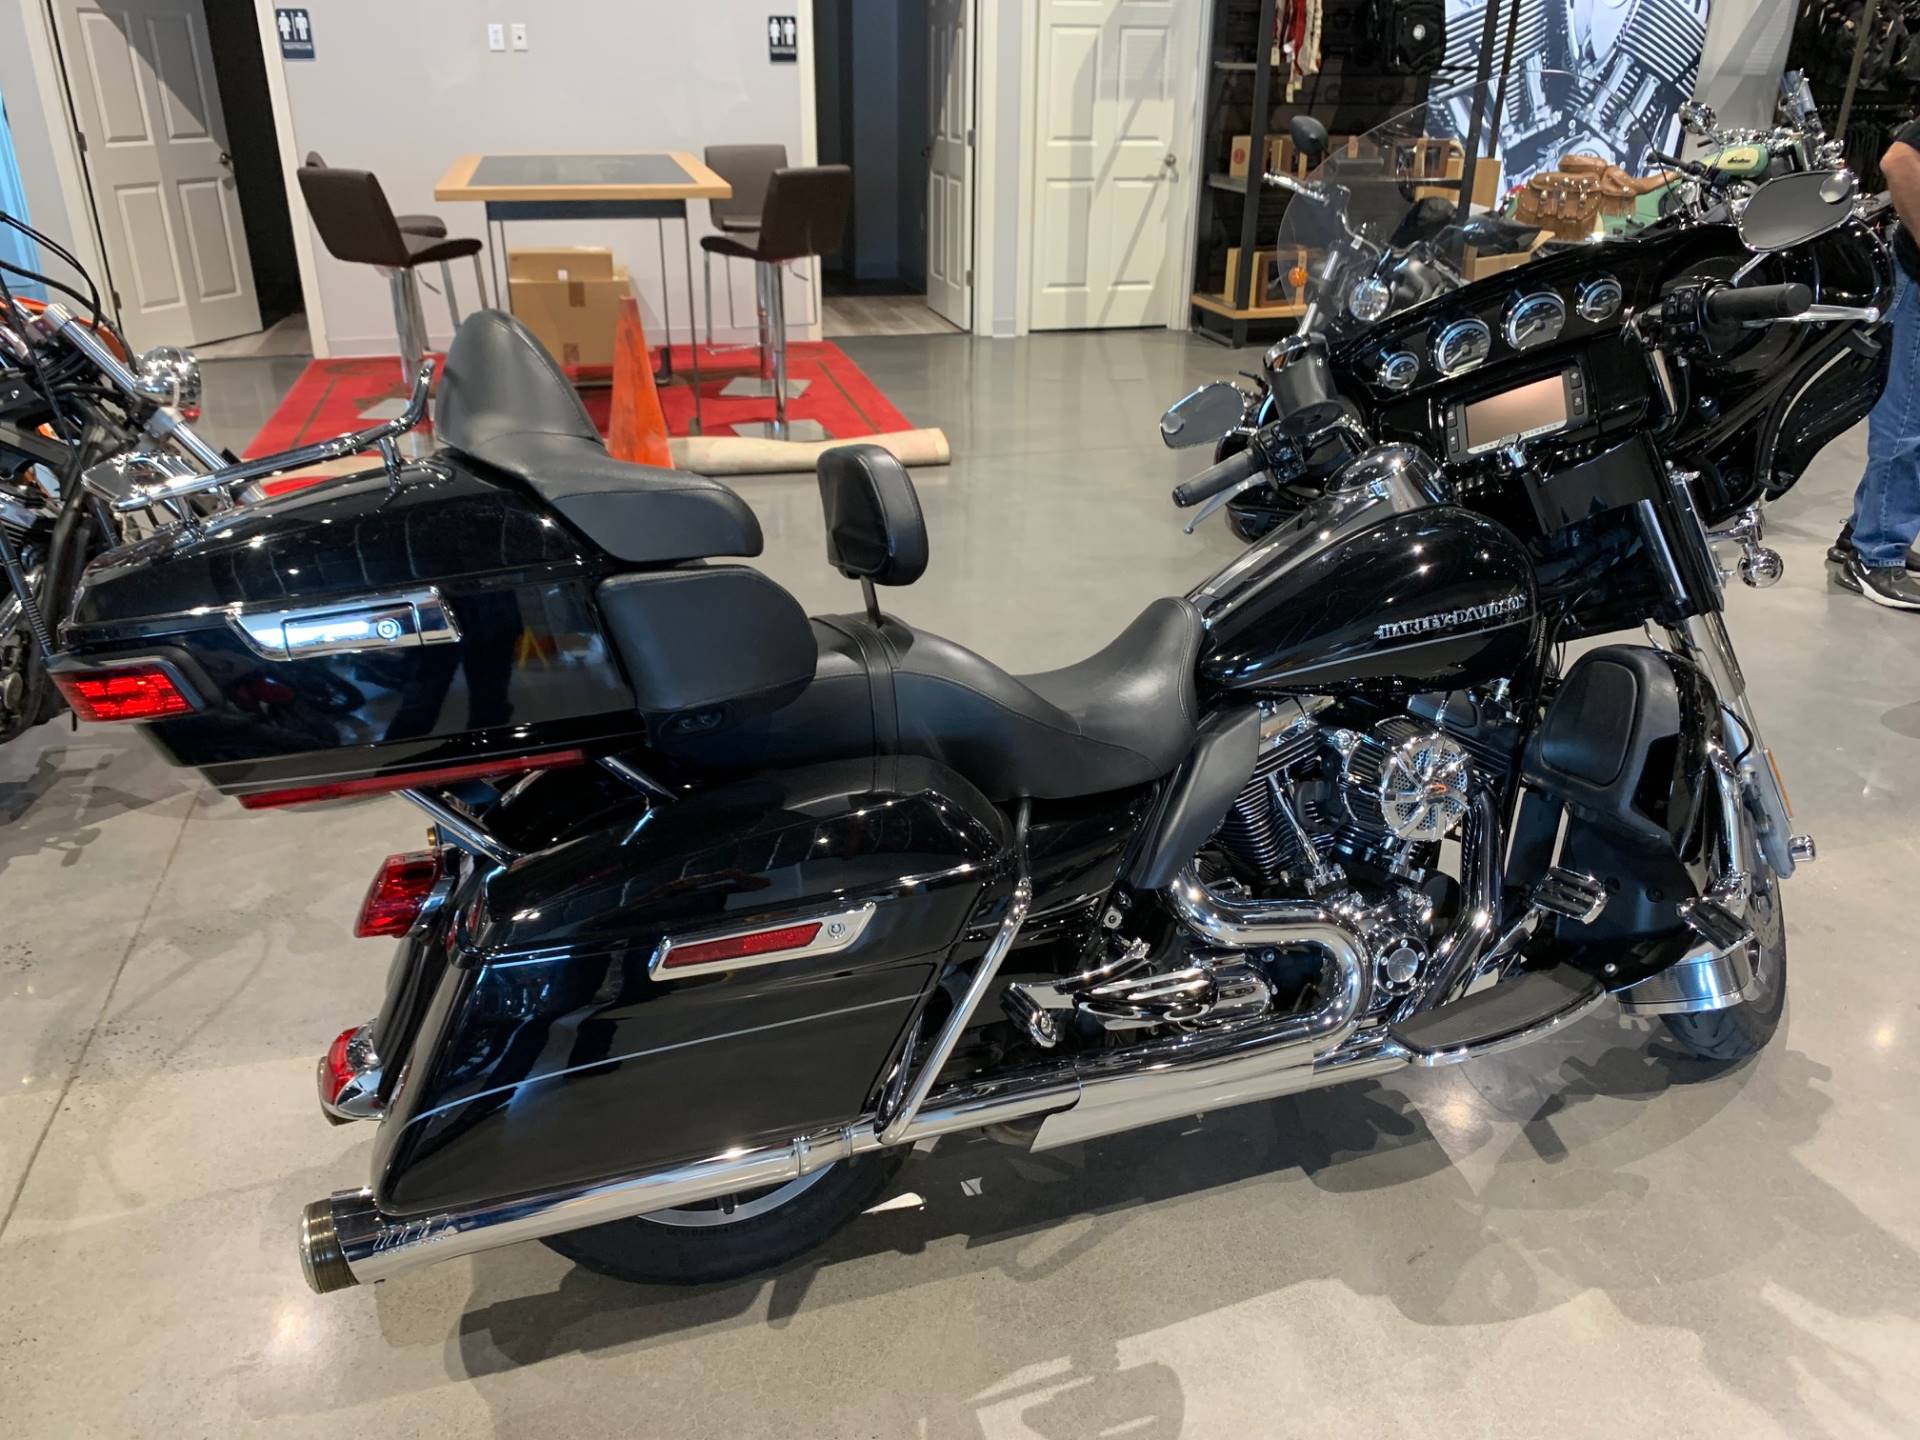 Used 2014 Harley Davidson Ultra Limited Motorcycles In Dansville Ny U66222 Vivid Black Peace Officer Special Edition